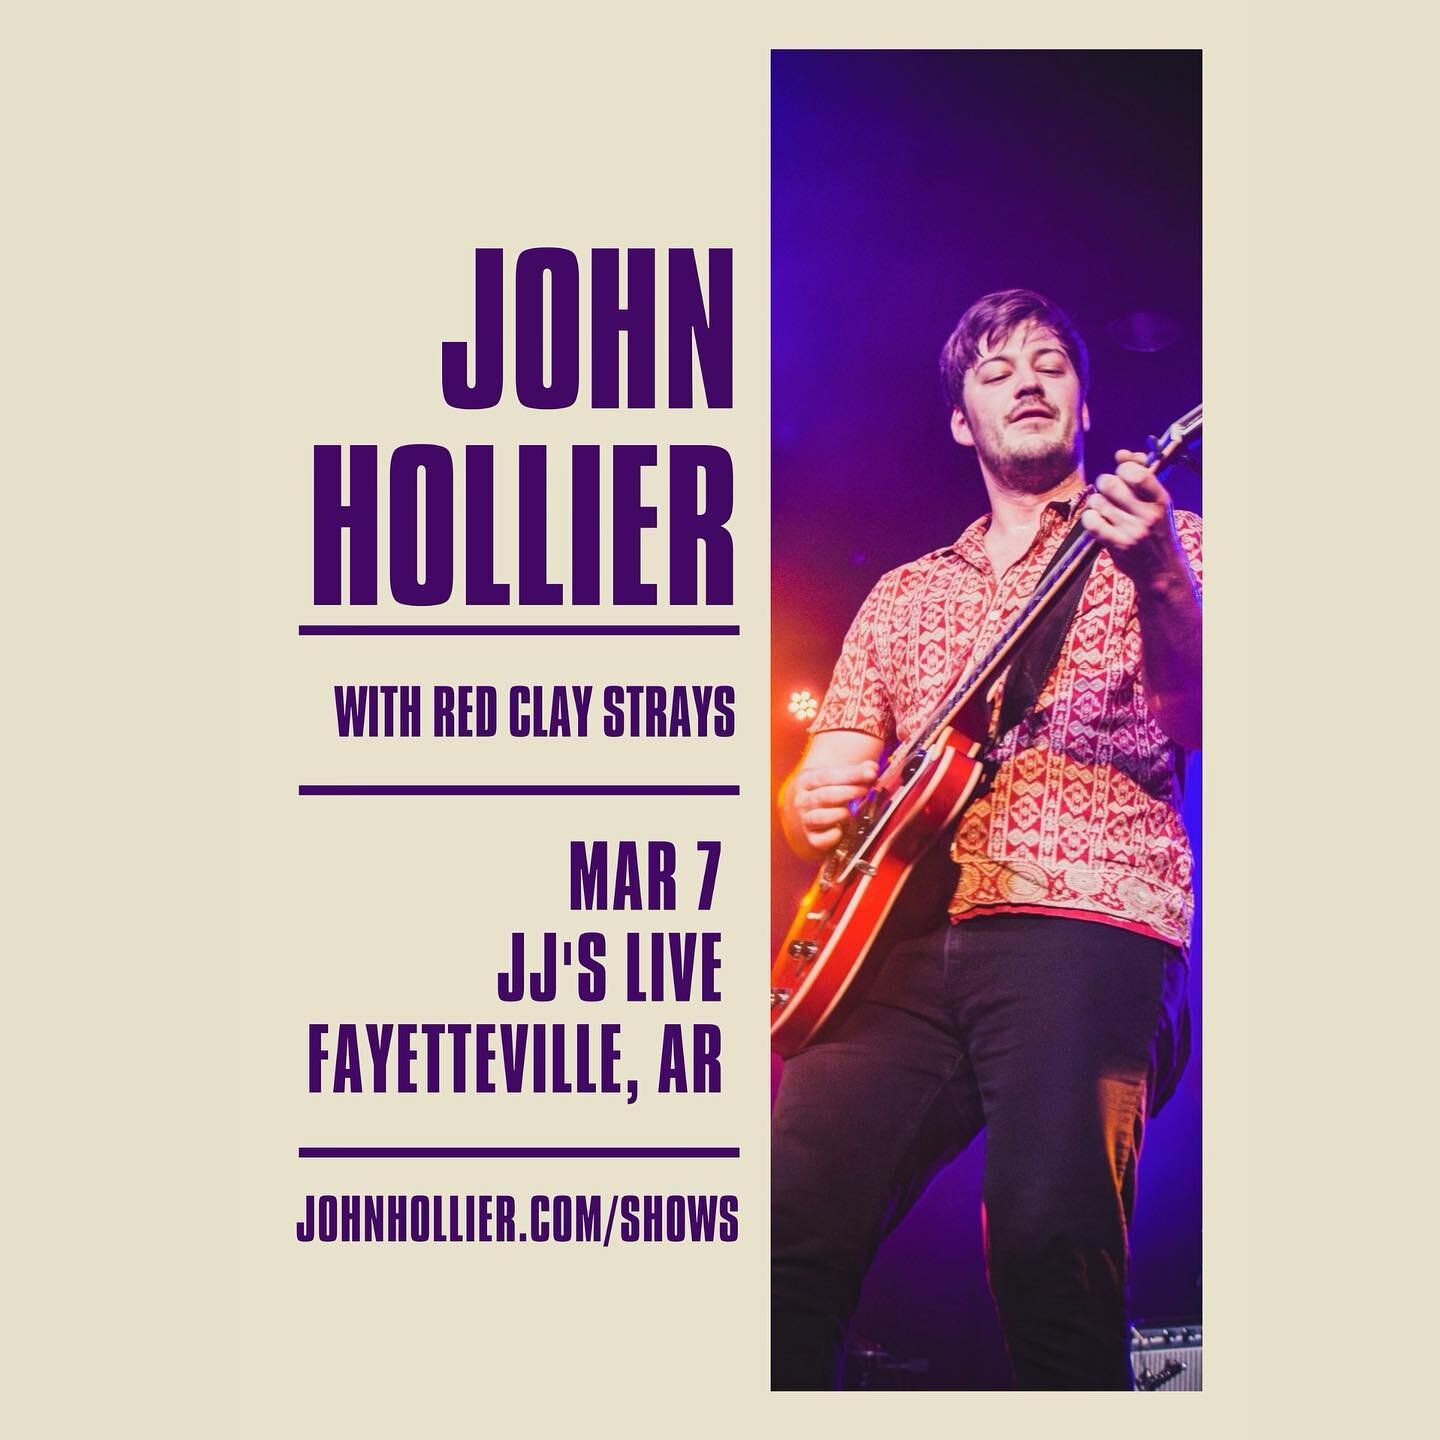 Fayetteville, AR! You&rsquo;re becoming our new home. See you next week with our boys @redclaystrays. @jjslivear. I&rsquo;m bringing the whole band. This is gonna be an amazing night of music.